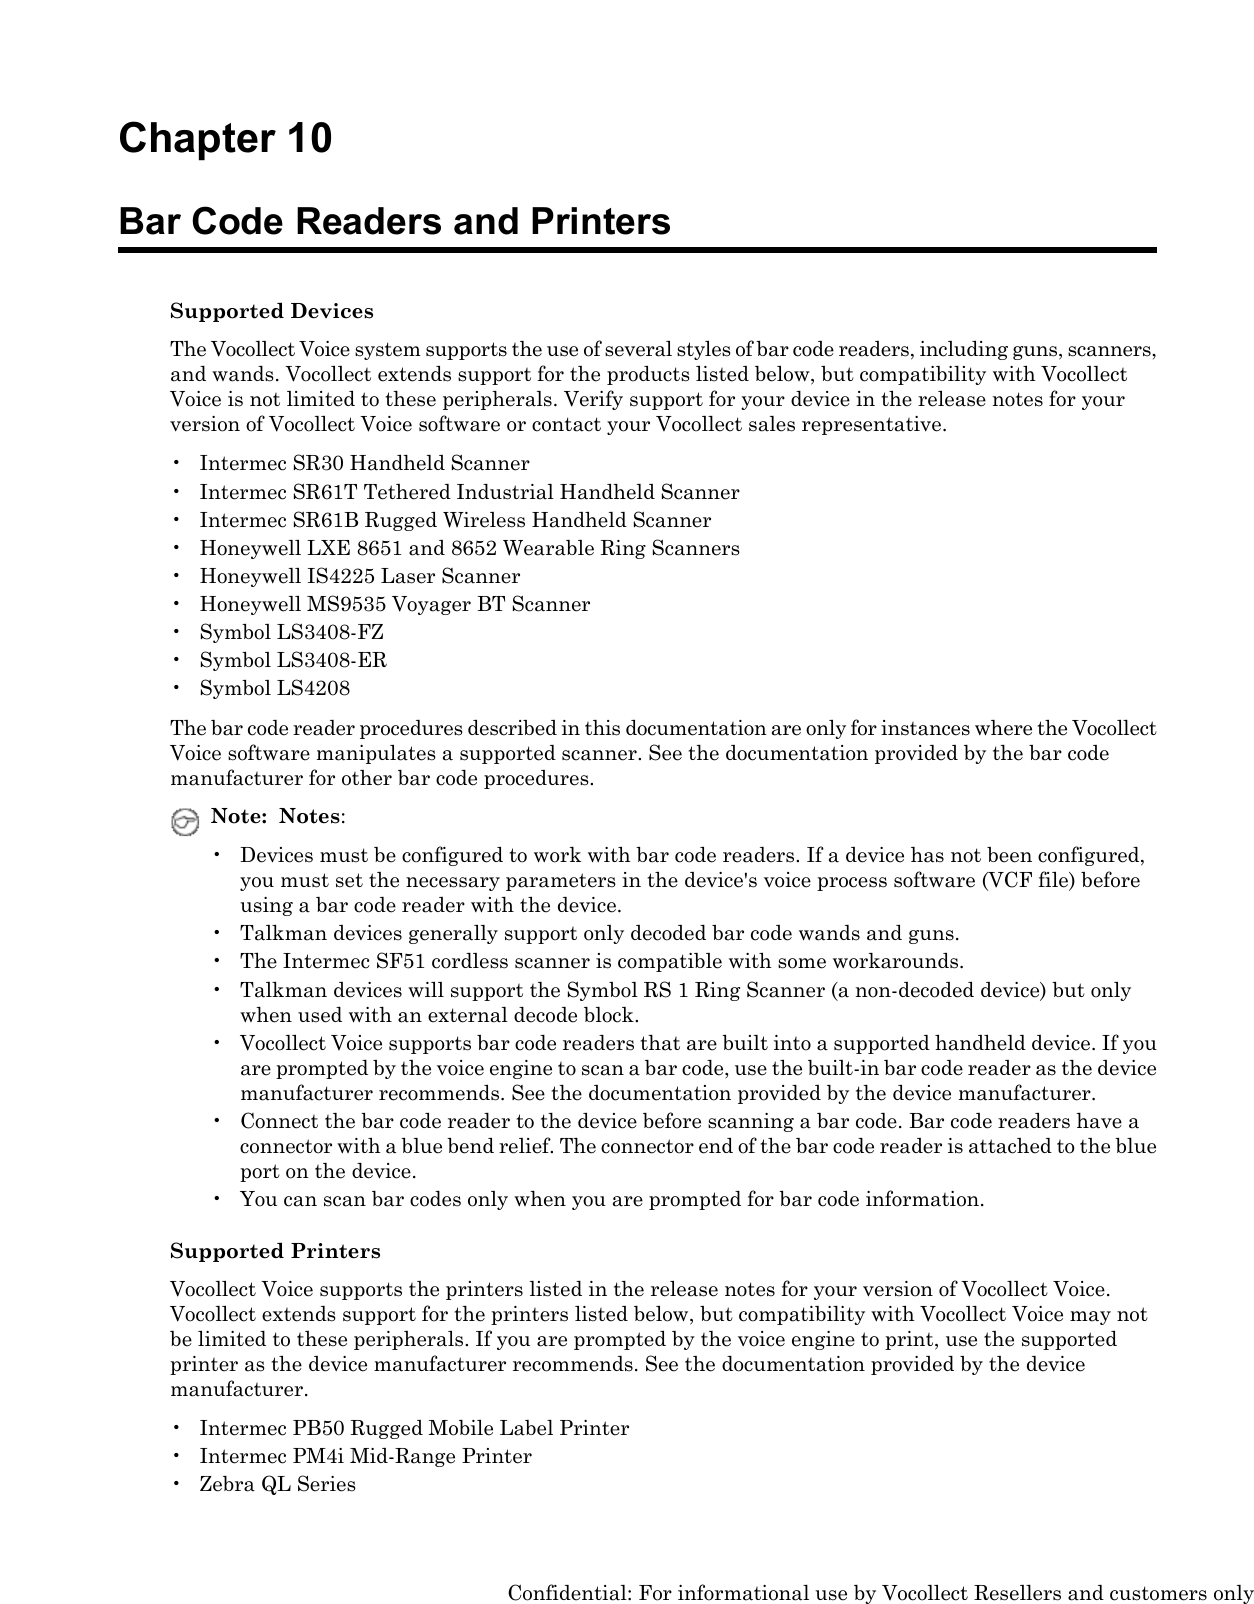 Chapter 10Bar Code Readers and PrintersSupported DevicesThe Vocollect Voice system supports the use of several styles of bar code readers, including guns, scanners,and wands. Vocollect extends support for the products listed below, but compatibility with VocollectVoice is not limited to these peripherals. Verify support for your device in the release notes for yourversion of Vocollect Voice software or contact your Vocollect sales representative.• Intermec SR30 Handheld Scanner• Intermec SR61T Tethered Industrial Handheld Scanner• Intermec SR61B Rugged Wireless Handheld Scanner• Honeywell LXE 8651 and 8652 Wearable Ring Scanners• Honeywell IS4225 Laser Scanner• Honeywell MS9535 Voyager BT Scanner• Symbol LS3408-FZ• Symbol LS3408-ER• Symbol LS4208The bar code reader procedures described in this documentation are only for instances where the VocollectVoice software manipulates a supported scanner. See the documentation provided by the bar codemanufacturer for other bar code procedures.Note: Notes:• Devices must be configured to work with bar code readers. If a device has not been configured,you must set the necessary parameters in the device&apos;s voice process software (VCF file) beforeusing a bar code reader with the device.• Talkman devices generally support only decoded bar code wands and guns.• The Intermec SF51 cordless scanner is compatible with some workarounds.• Talkman devices will support the Symbol RS 1 Ring Scanner (a non-decoded device) but onlywhen used with an external decode block.• Vocollect Voice supports bar code readers that are built into a supported handheld device. If youare prompted by the voice engine to scan a bar code, use the built-in bar code reader as the devicemanufacturer recommends. See the documentation provided by the device manufacturer.• Connect the bar code reader to the device before scanning a bar code. Bar code readers have aconnector with a blue bend relief. The connector end of the bar code reader is attached to the blueport on the device.• You can scan bar codes only when you are prompted for bar code information.Supported PrintersVocollect Voice supports the printers listed in the release notes for your version of Vocollect Voice.Vocollect extends support for the printers listed below, but compatibility with Vocollect Voice may notbe limited to these peripherals. If you are prompted by the voice engine to print, use the supportedprinter as the device manufacturer recommends. See the documentation provided by the devicemanufacturer.• Intermec PB50 Rugged Mobile Label Printer• Intermec PM4i Mid-Range Printer• Zebra QL SeriesConfidential: For informational use by Vocollect Resellers and customers only